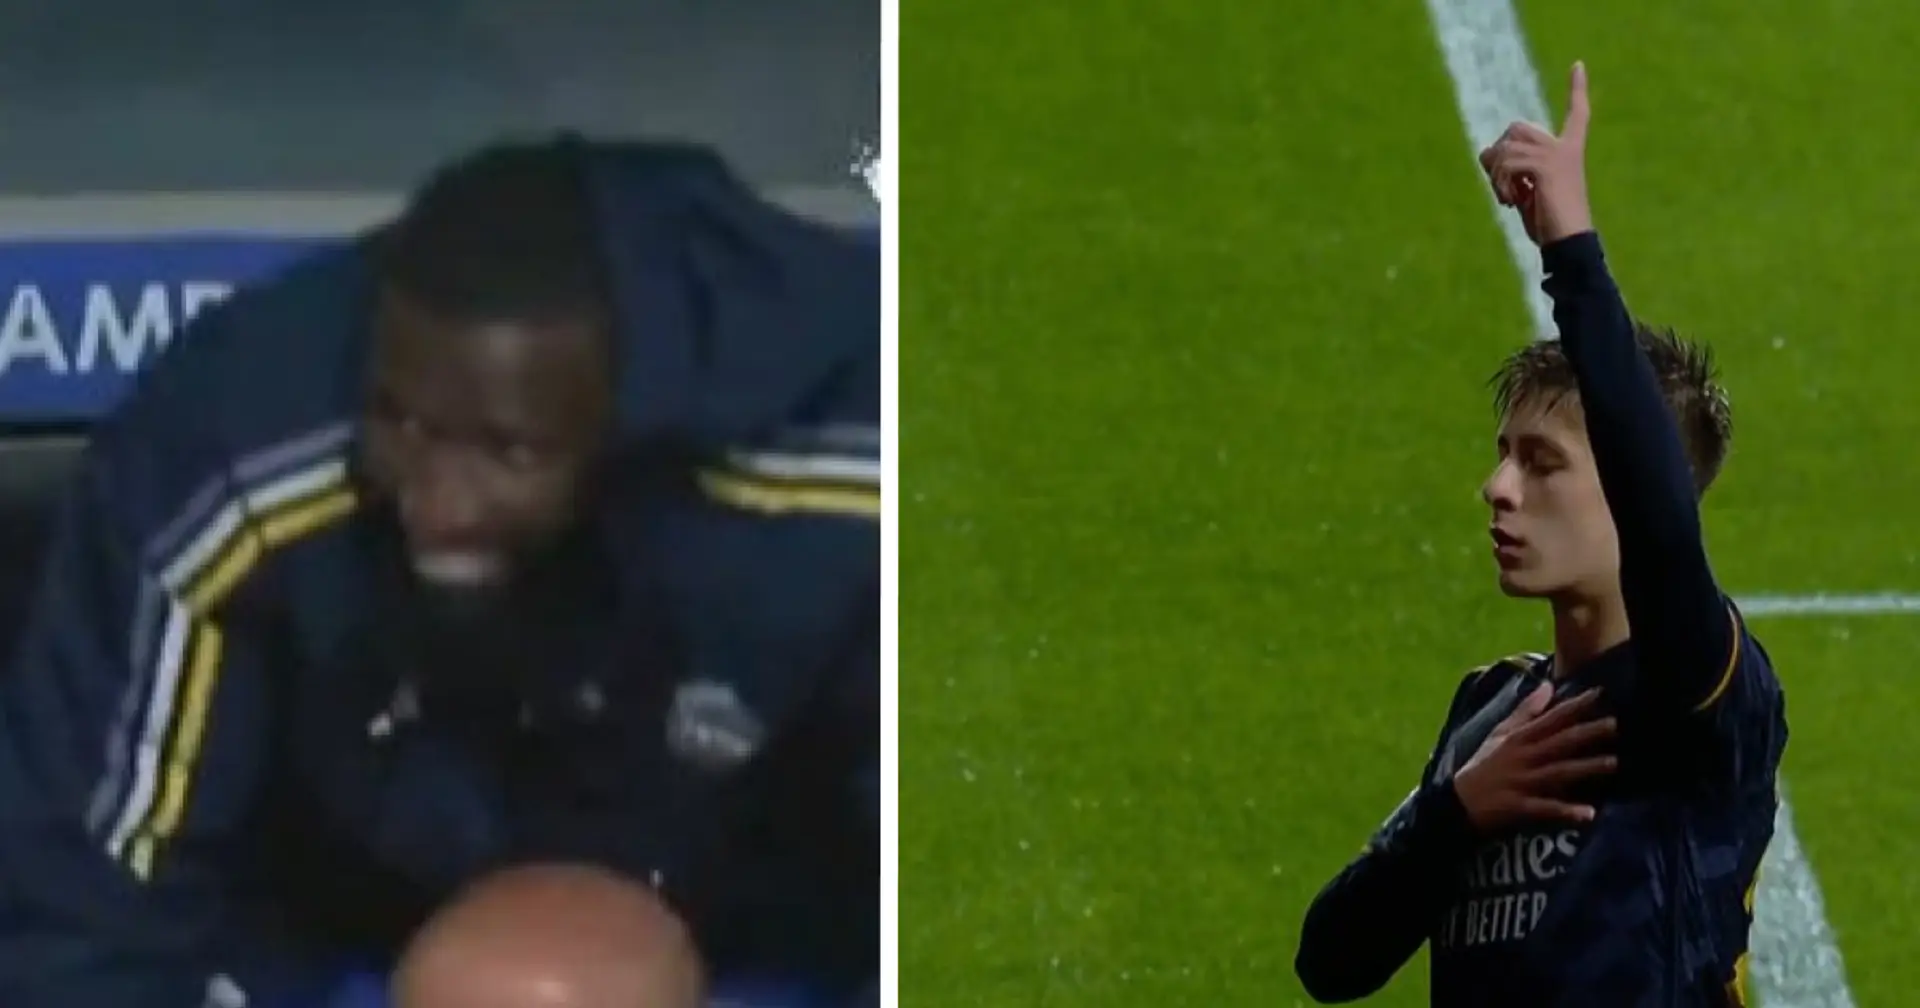 Spotted: Rudiger's celebrates Arda Guler's goal different from everyone else